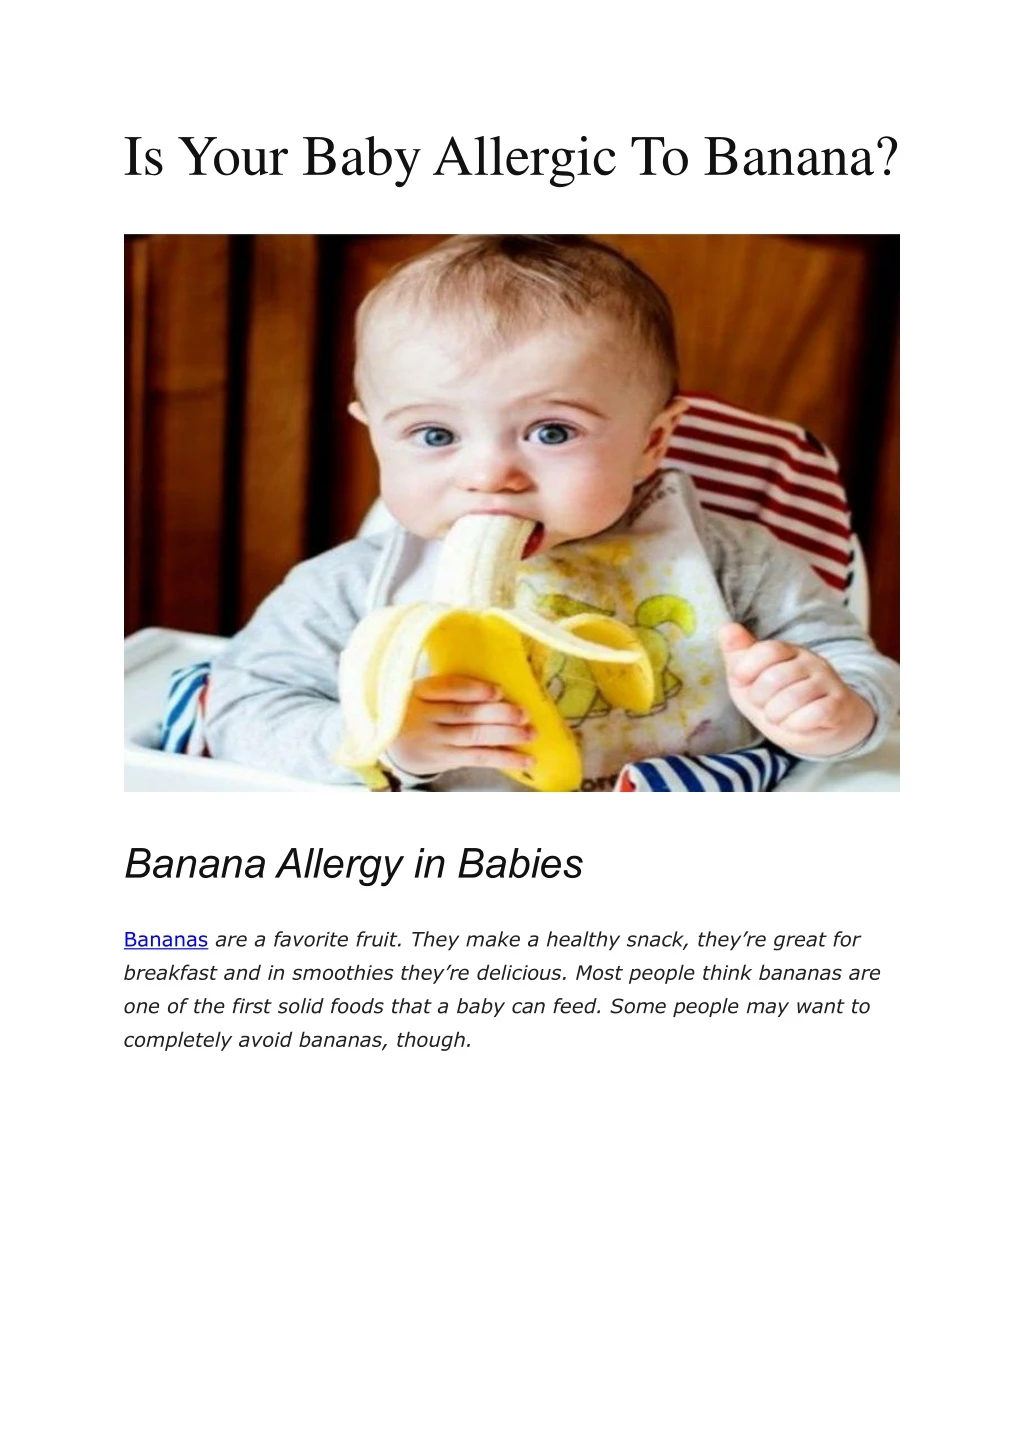 is your baby allergic to banana